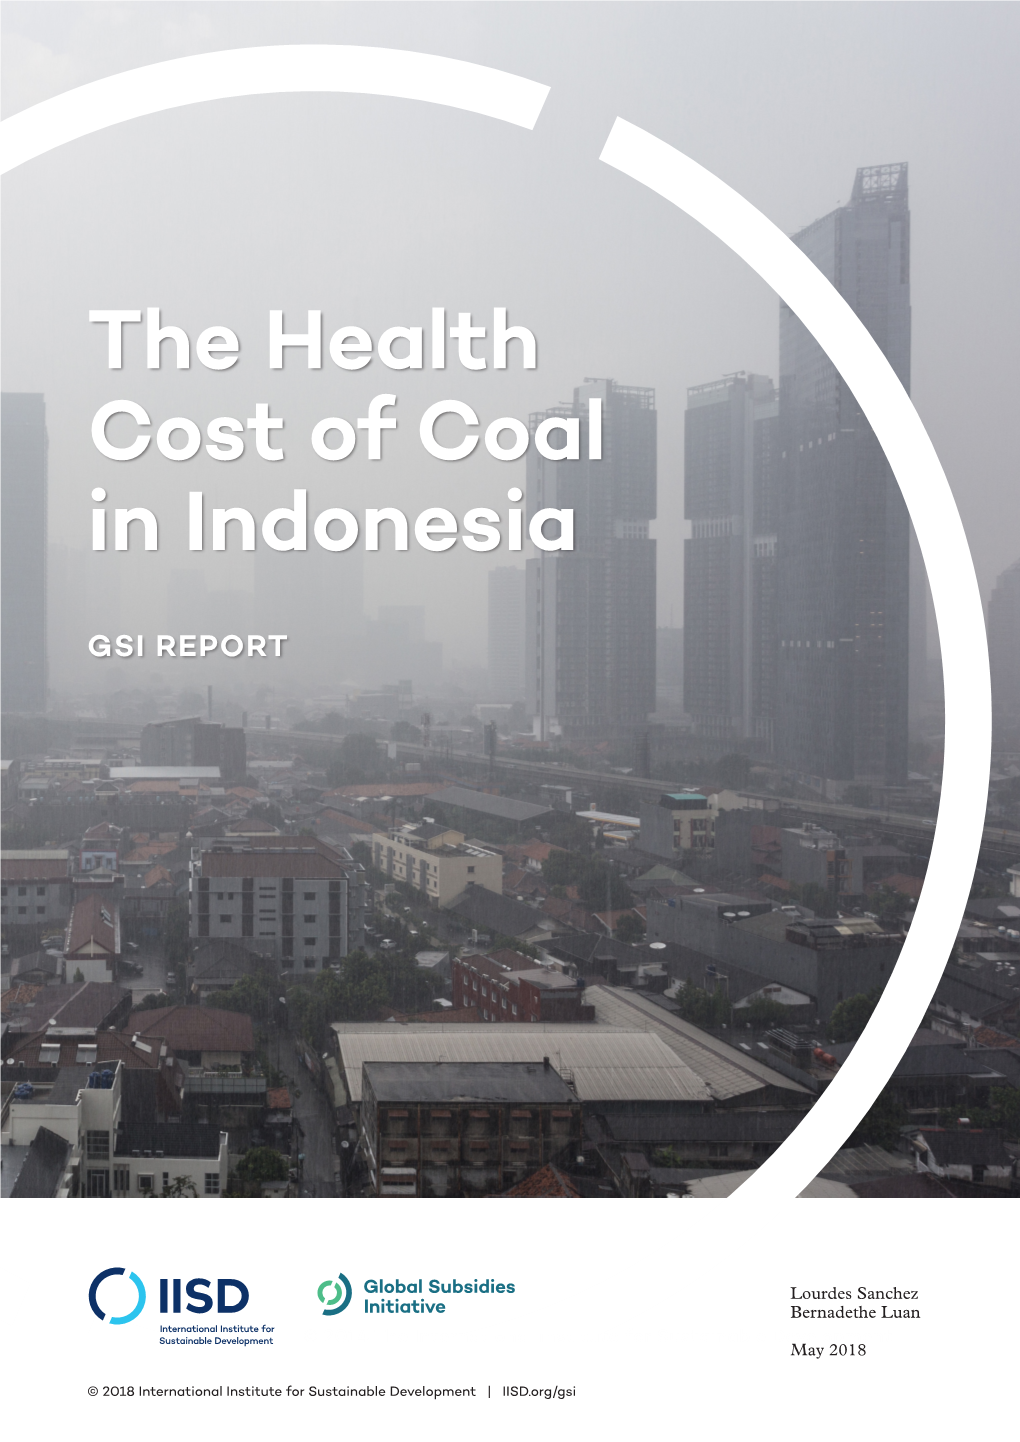 The Health Cost of Coal in Indonesia